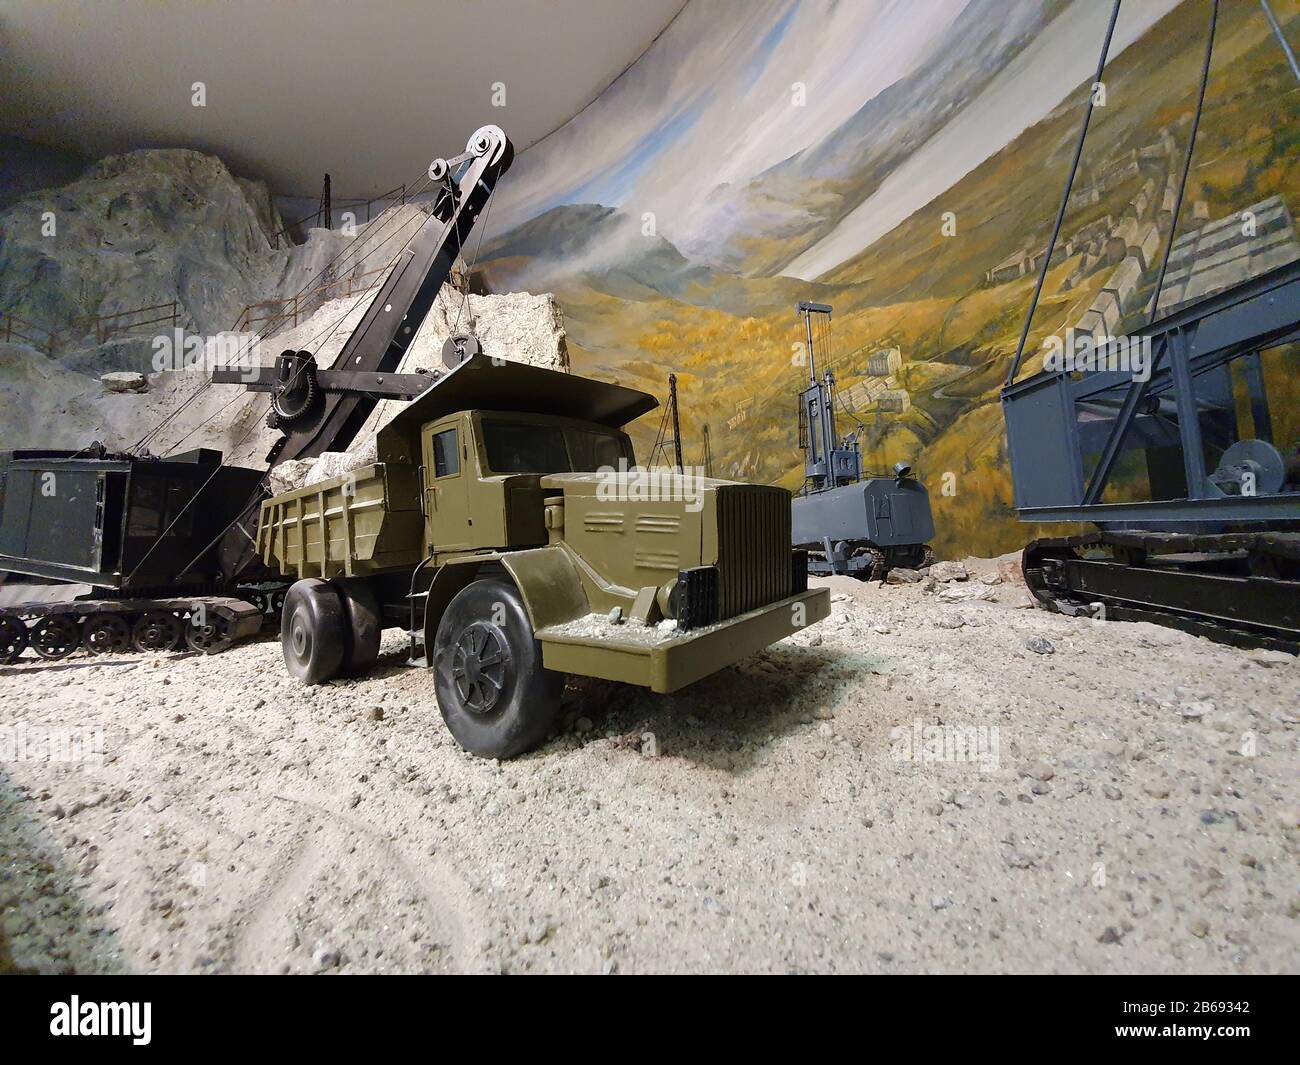 Model of equipment for the transportation of rocks. Large trucks are used in the mining industry. Stock Photo